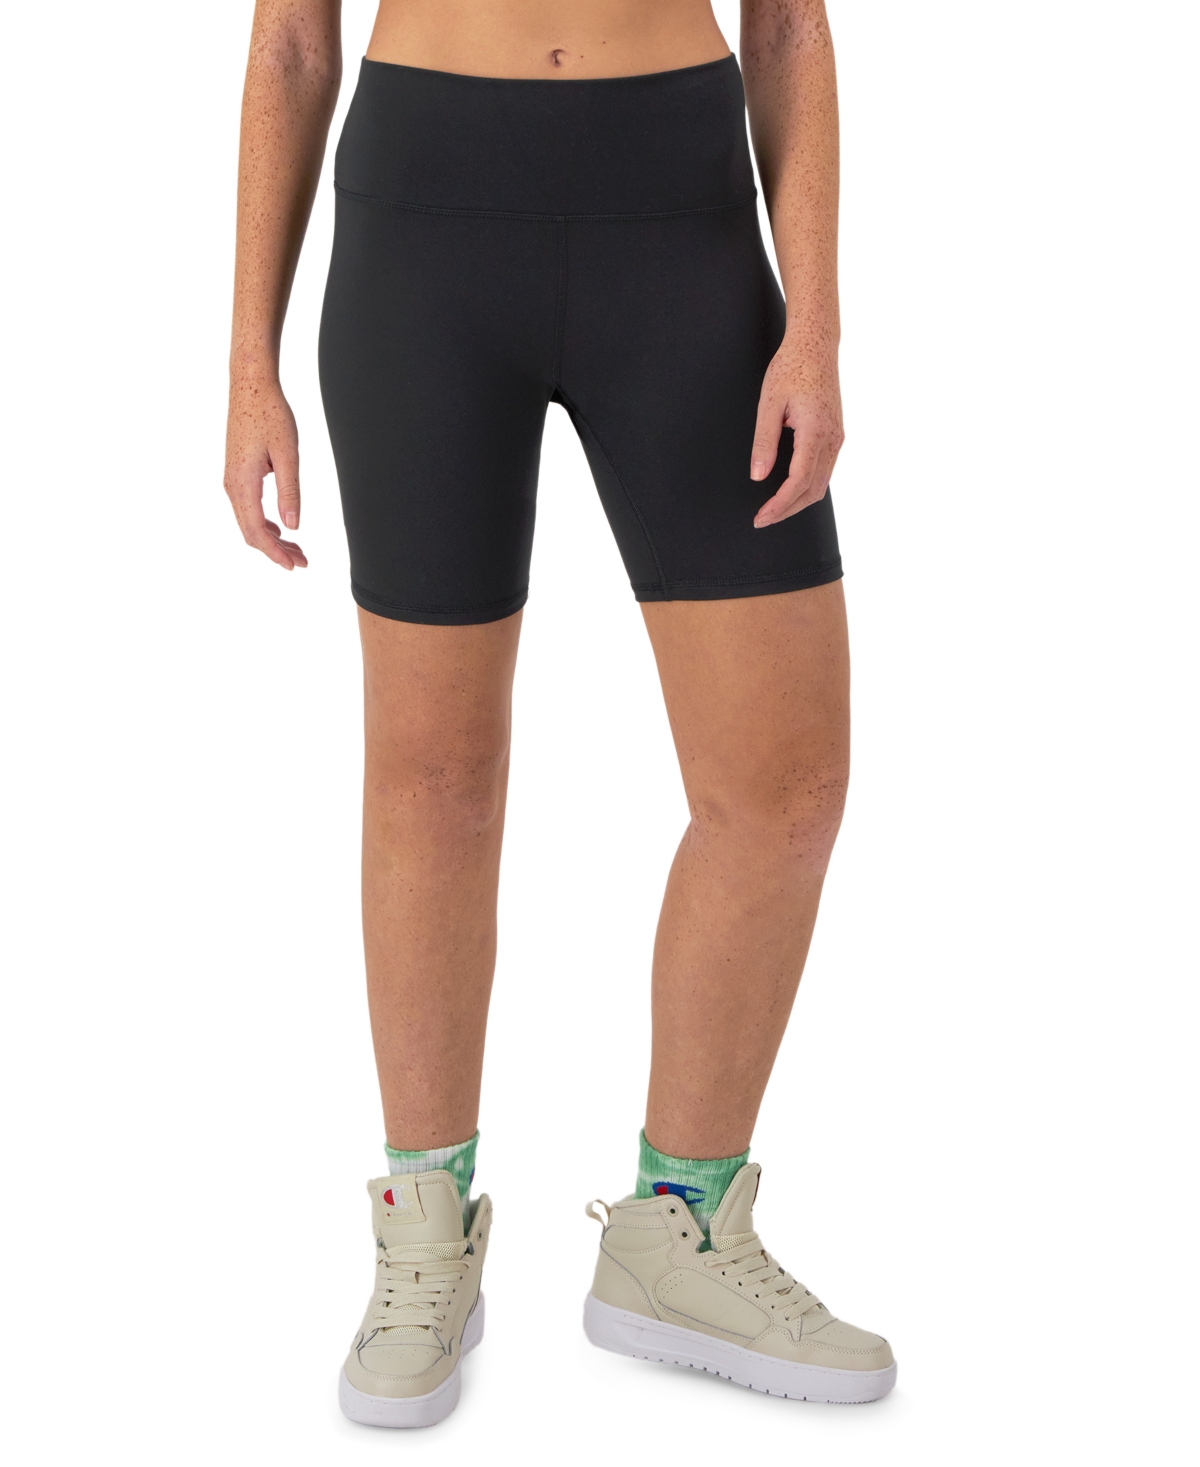 Champion Women's Soft Touch High-rise Bike Shorts In Black